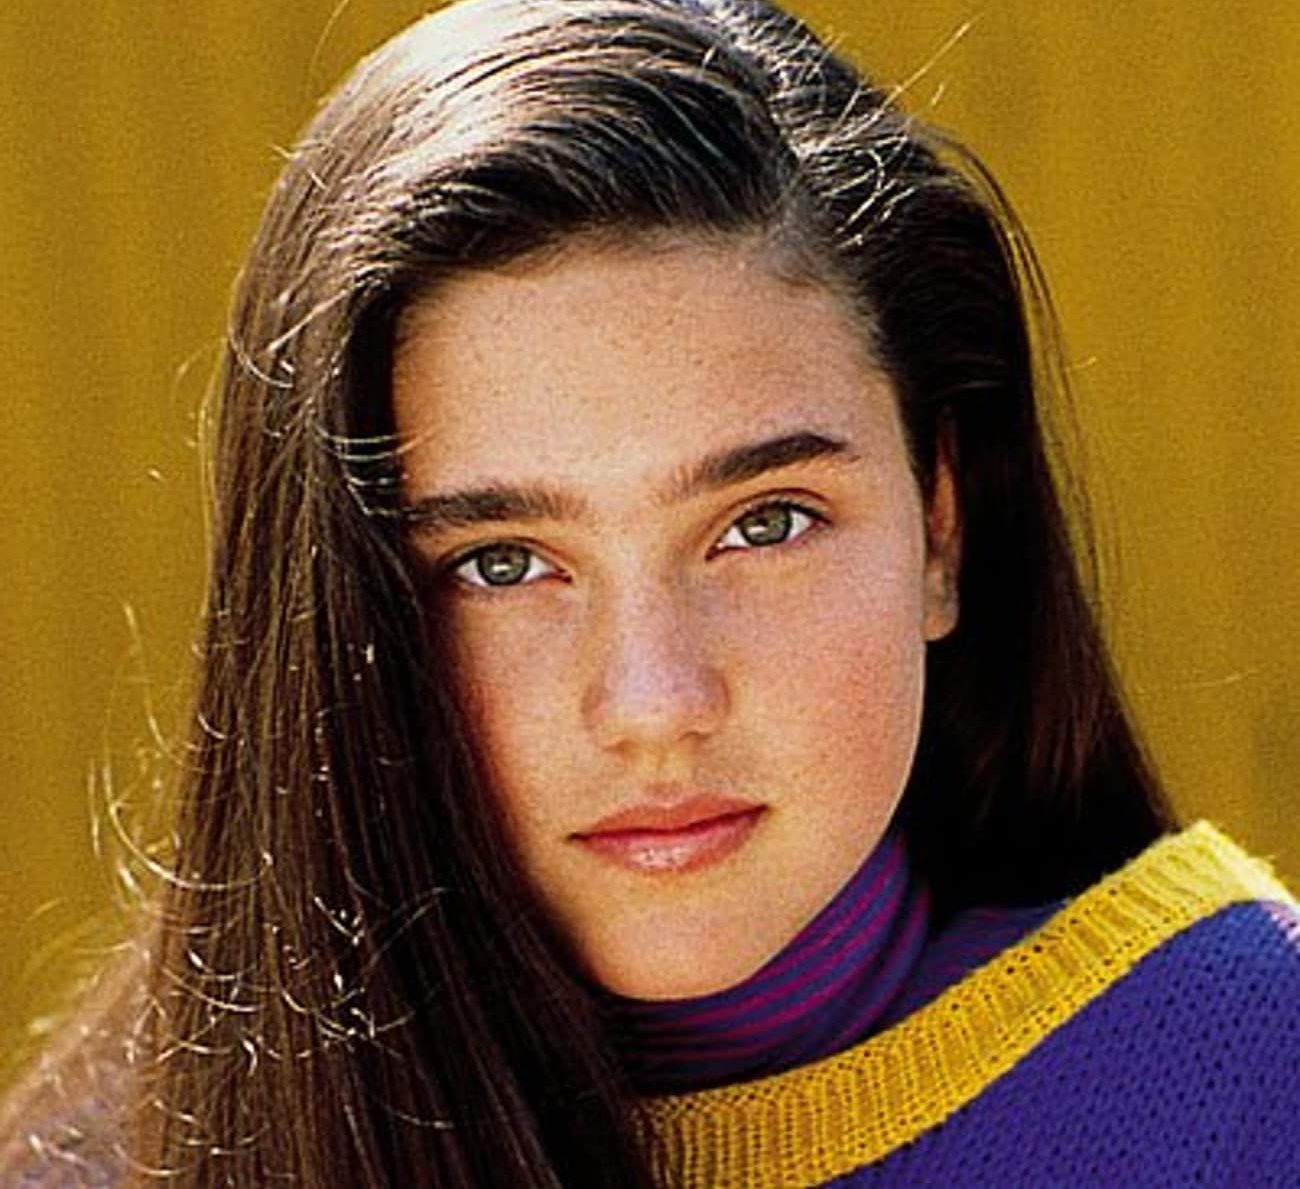 20 Things You Probably Didn't Know About Jennifer Connelly